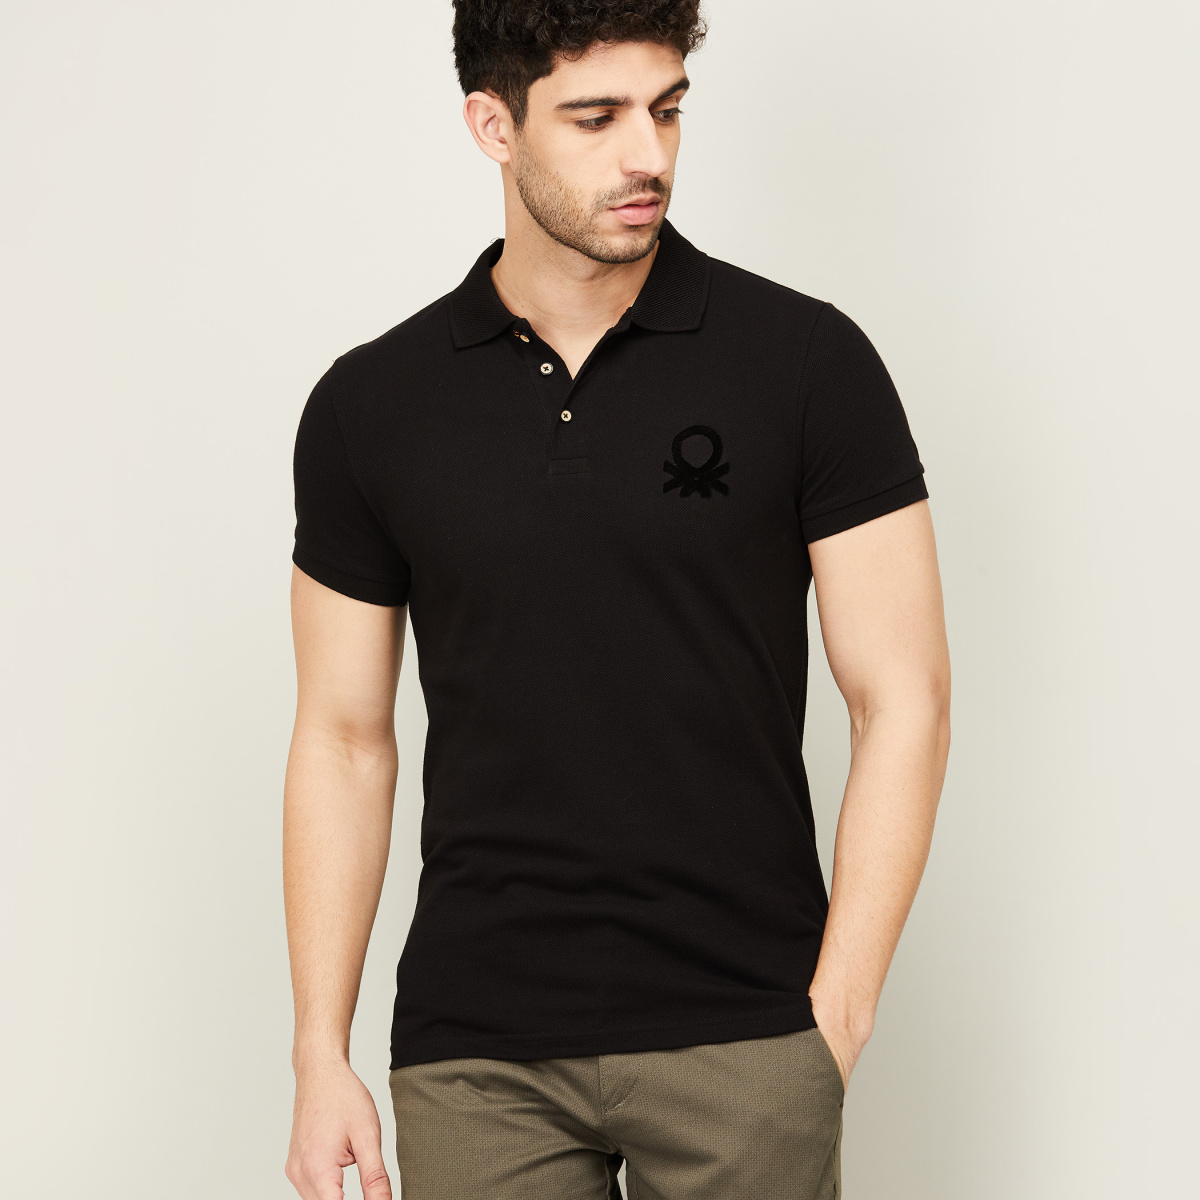 UNITED COLORS OF BENETTON Men Solid Polo T-shirt